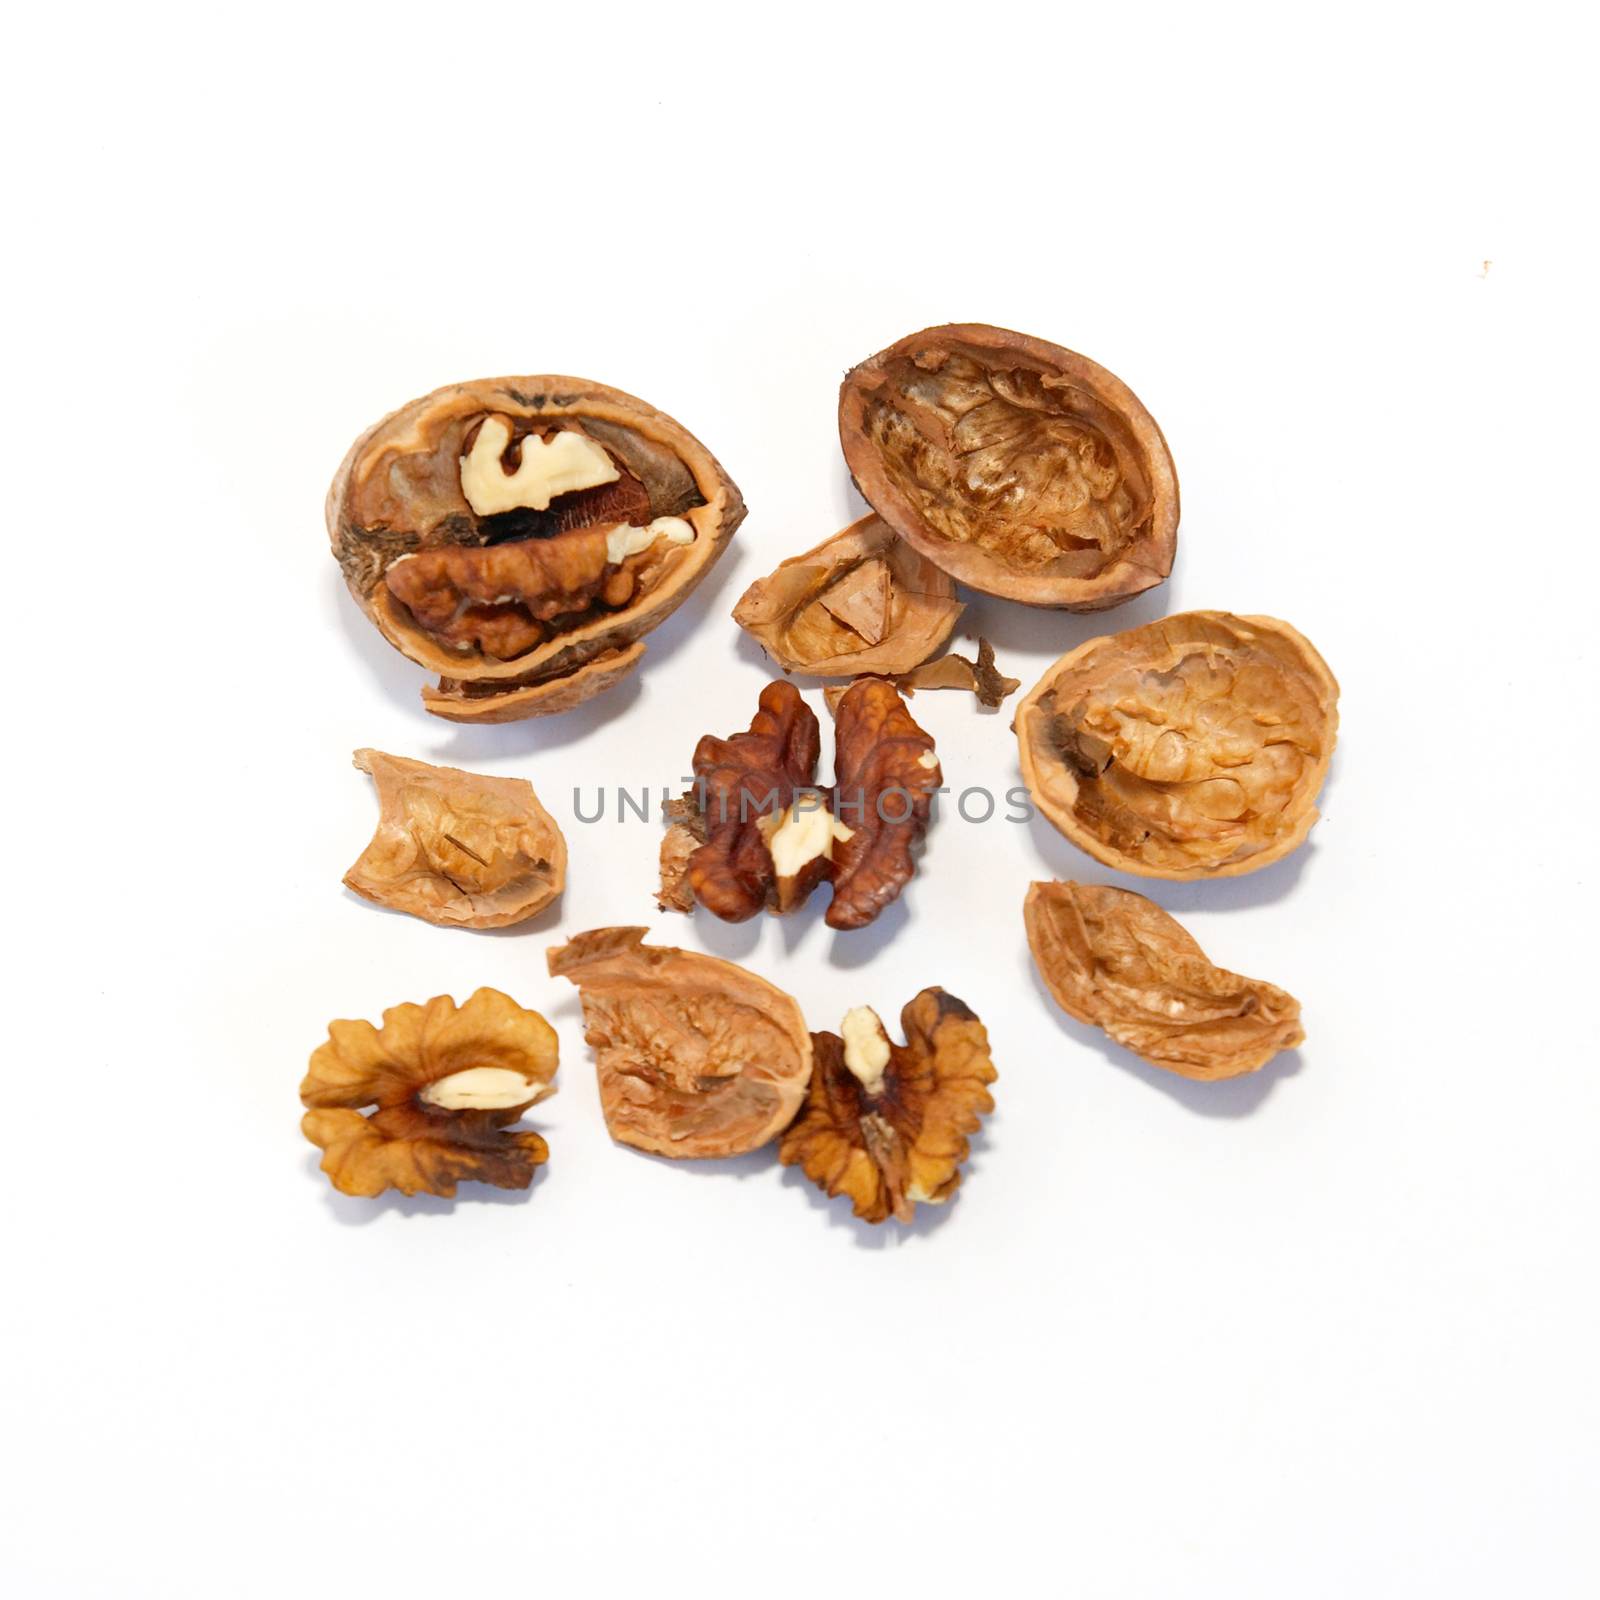 A walnuts isolated on white.